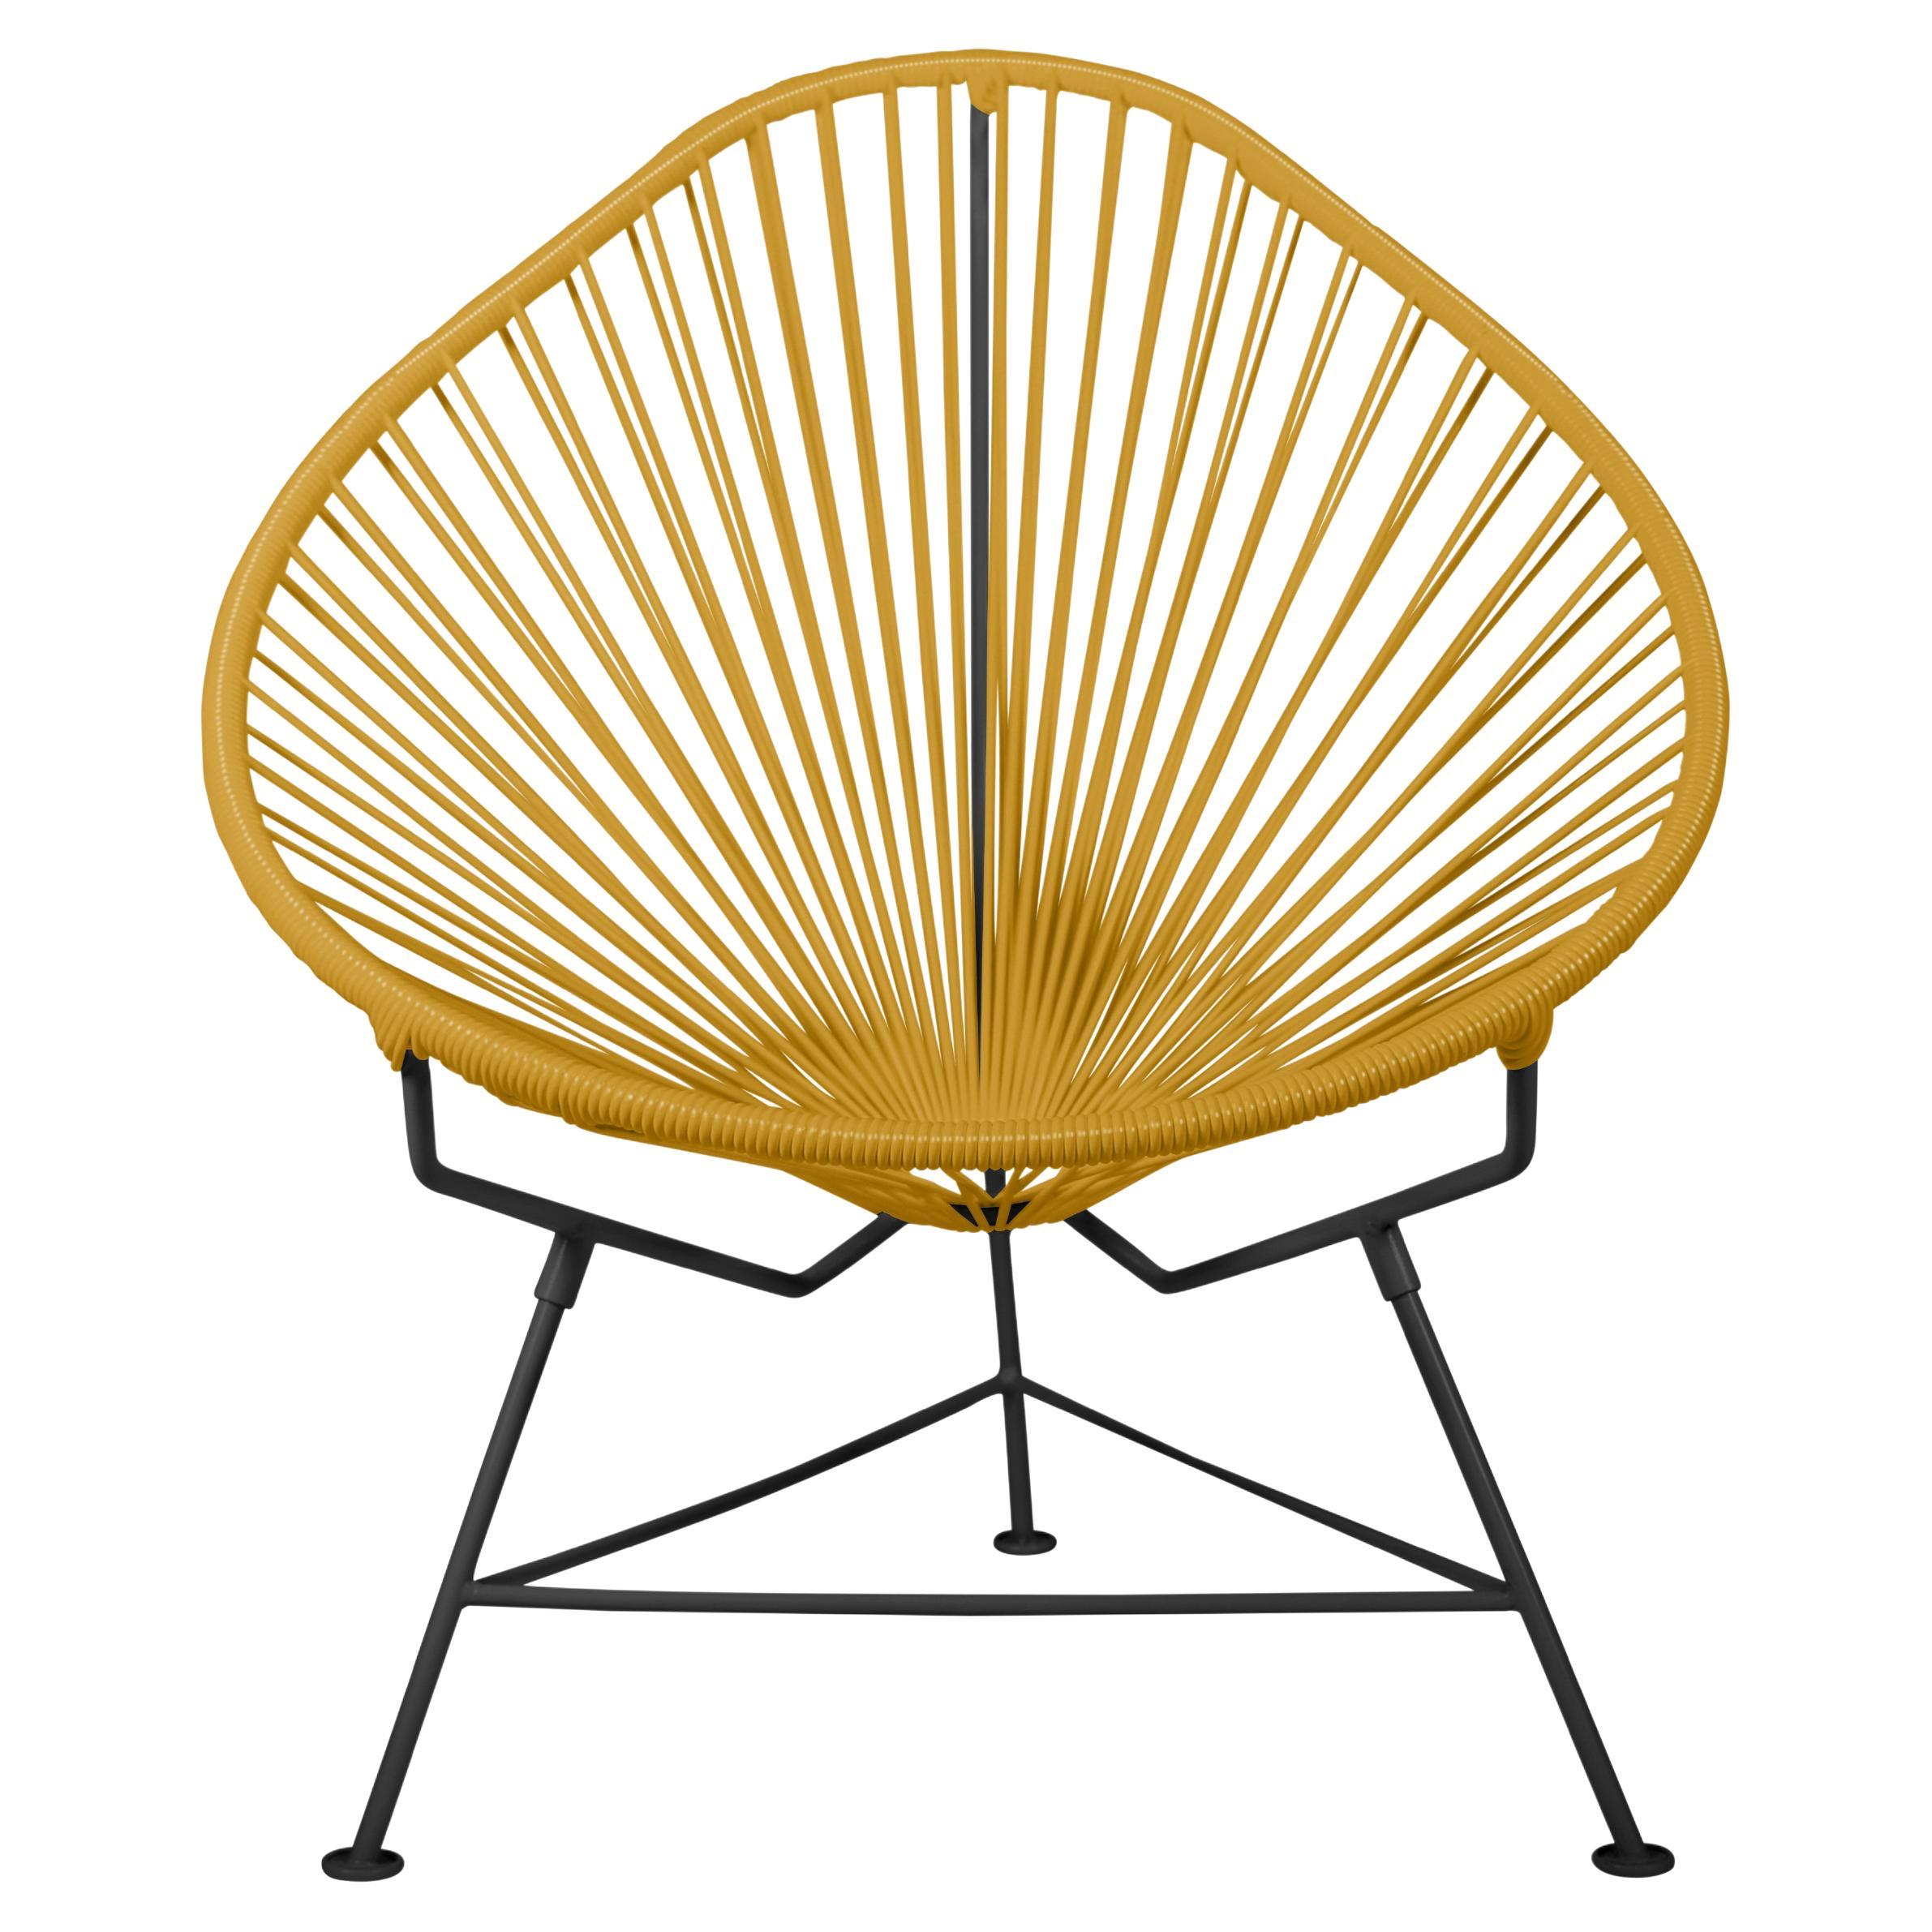 Innit Designs Acapulco Chair Caramel Weave on Black Frame